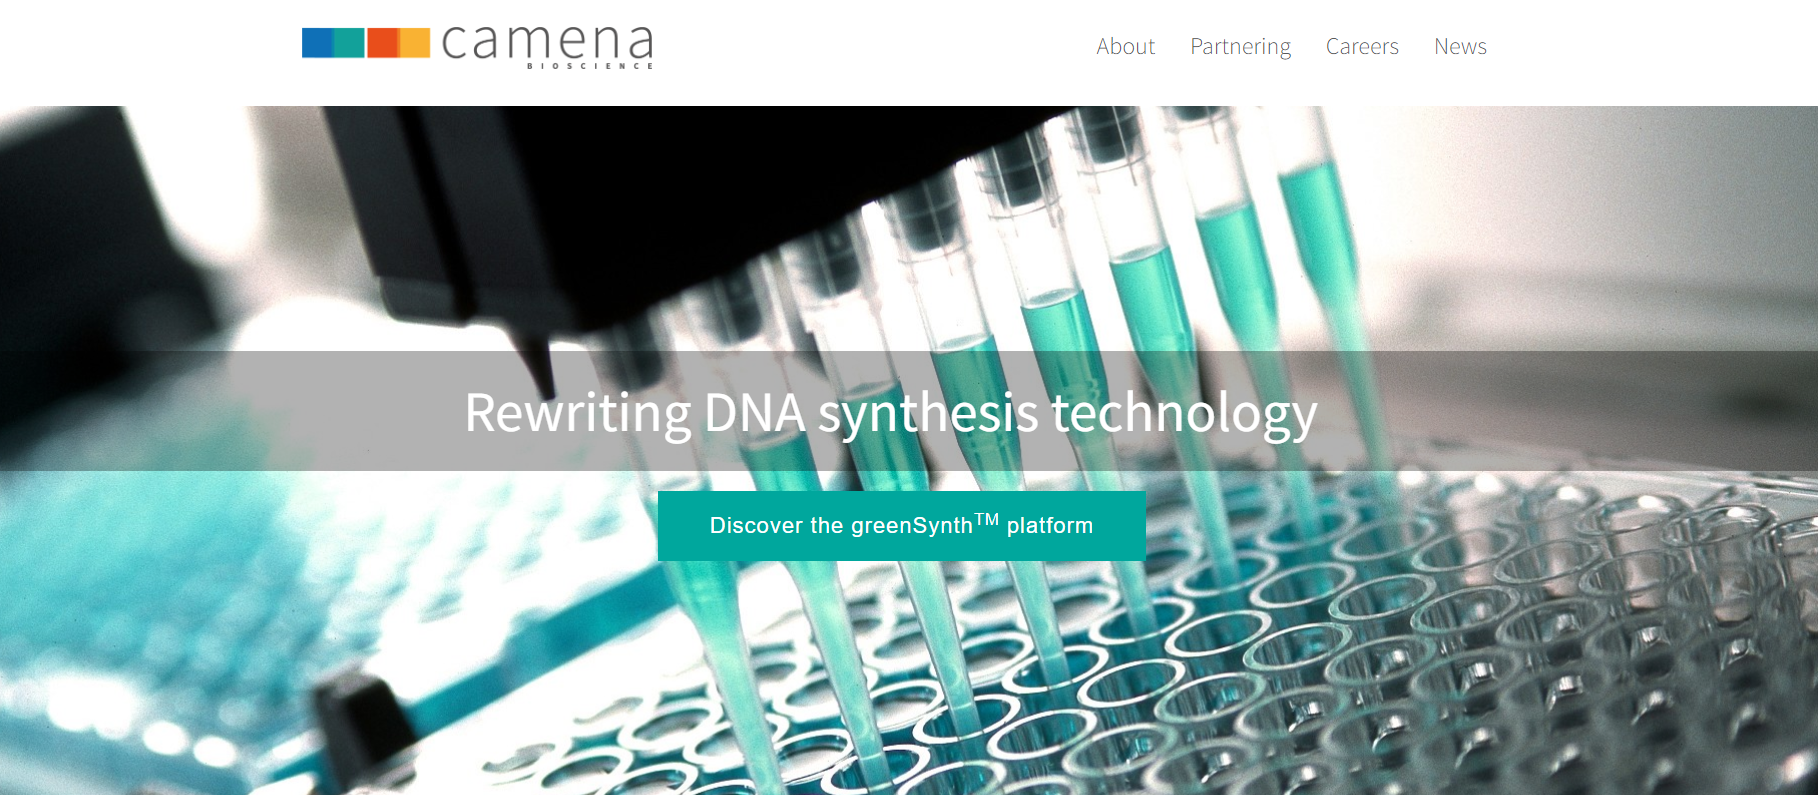 Raising over $10M in funding, Camena is revolutionizing the field of biotechnology research.